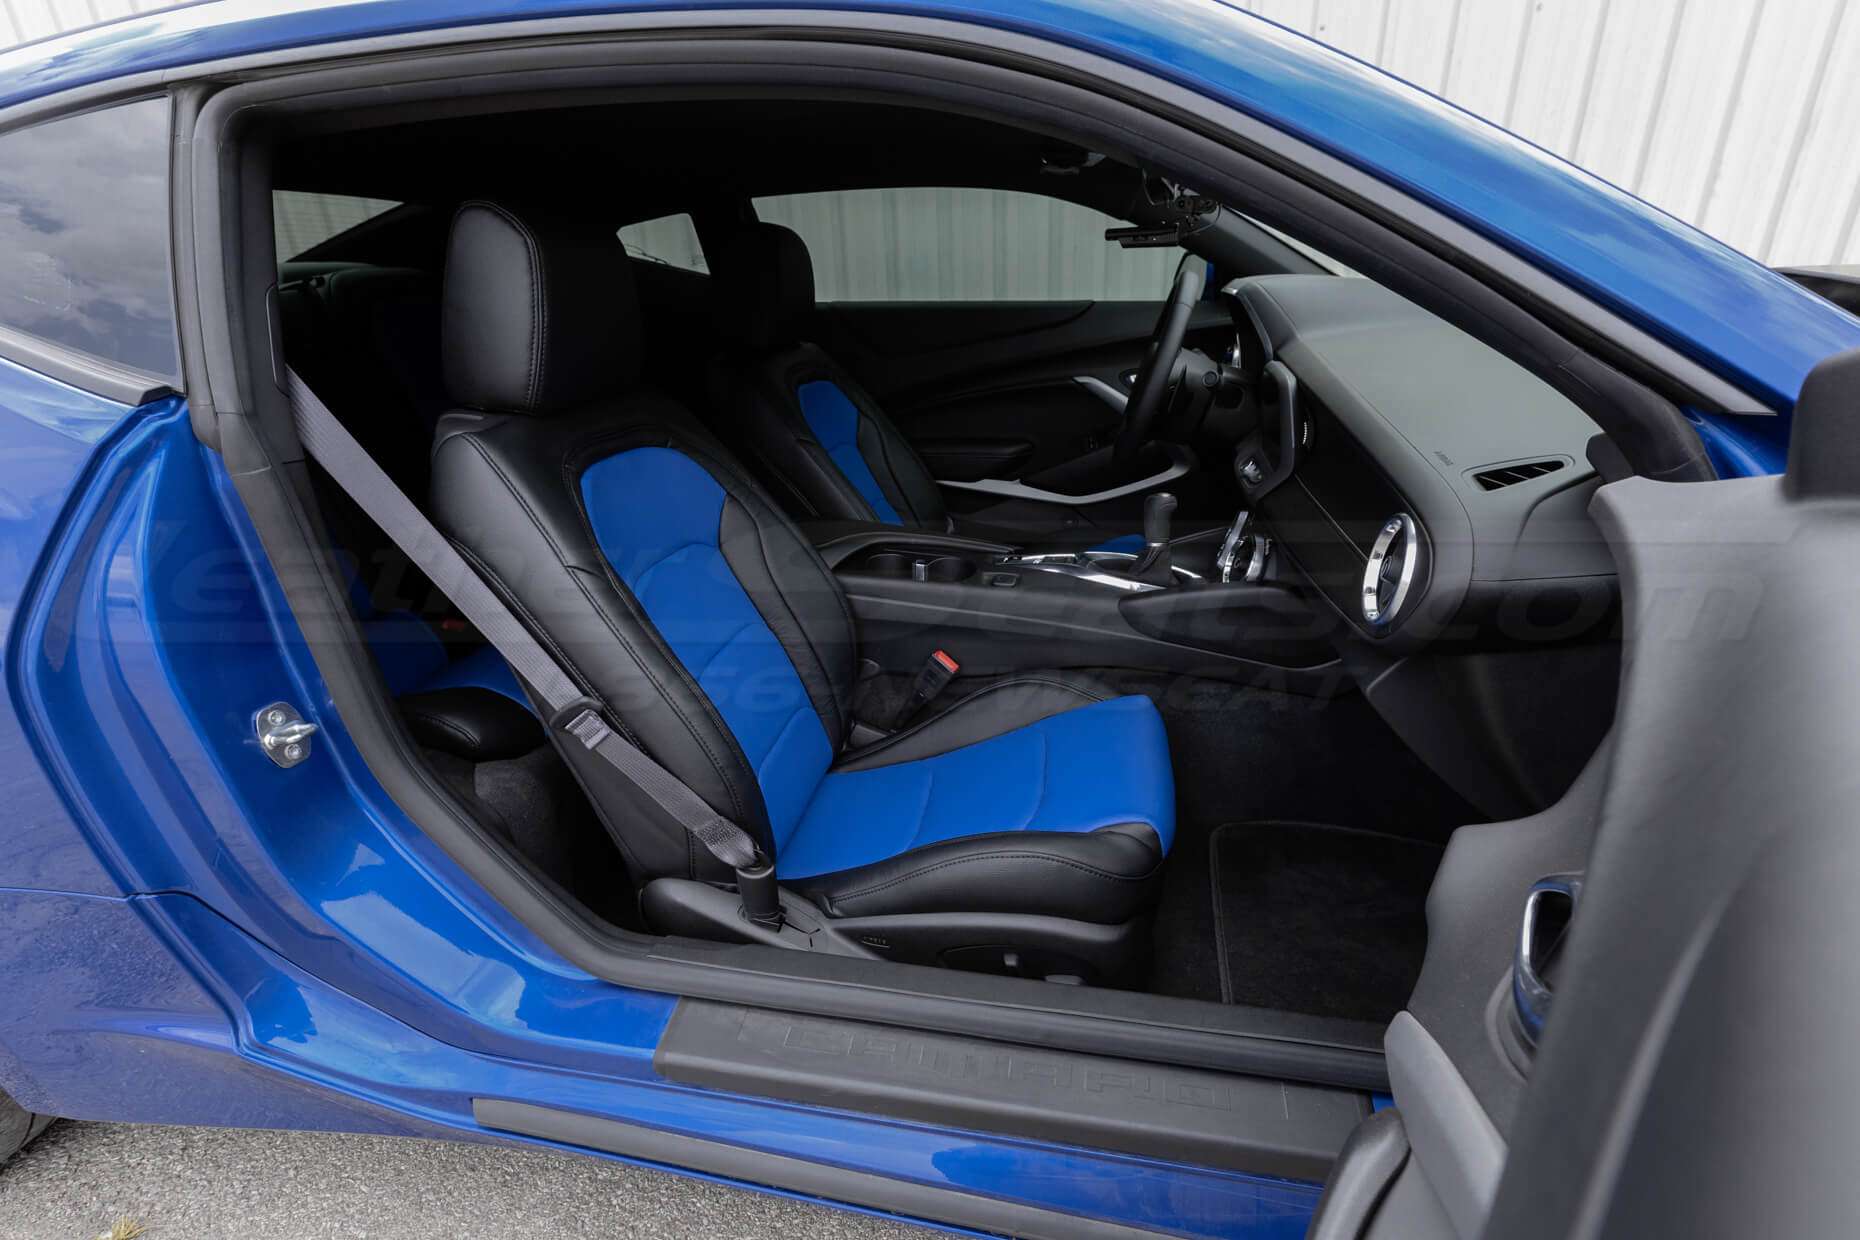 Chevy camaro Installed Leather Seats - Front passenger wide angle